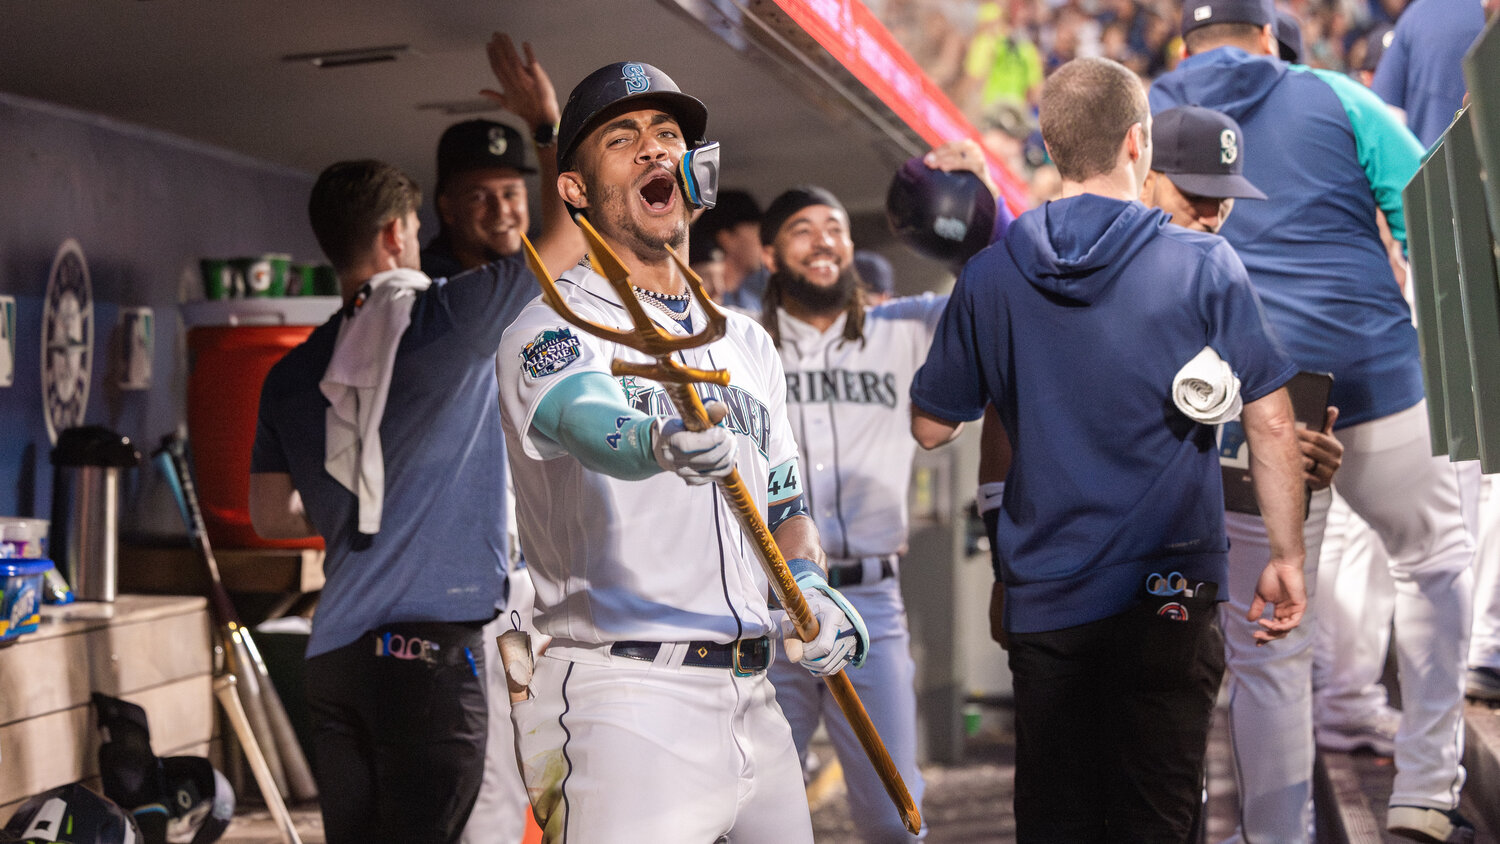 Julio Rodríguez celebrates a home run as J. P. Crawford smiles and receives high-fives behind him inside the Mariners dugout at T-Mobile Park in Seattle on Monday, Aug. 28.